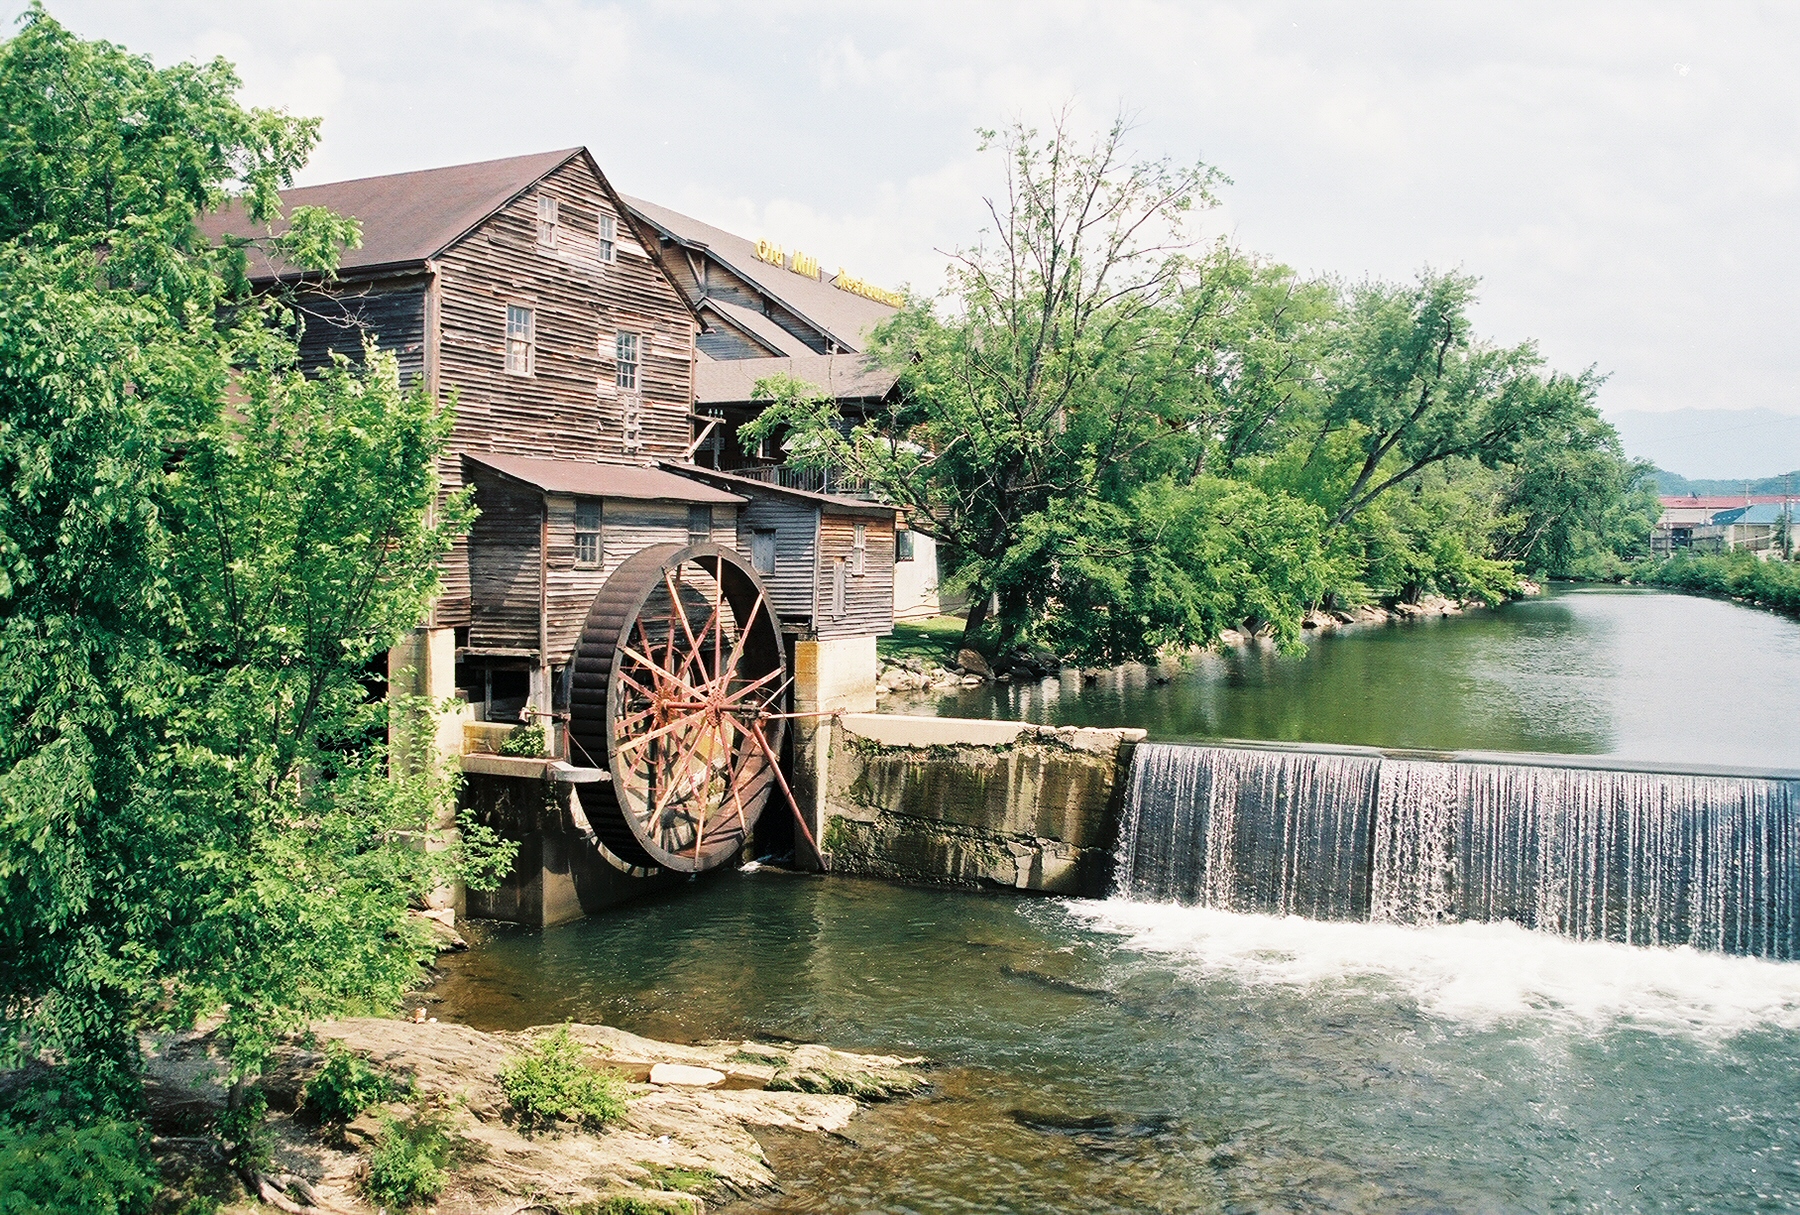 7 Things You Didn't Know About The Pigeon Forge Old Mill